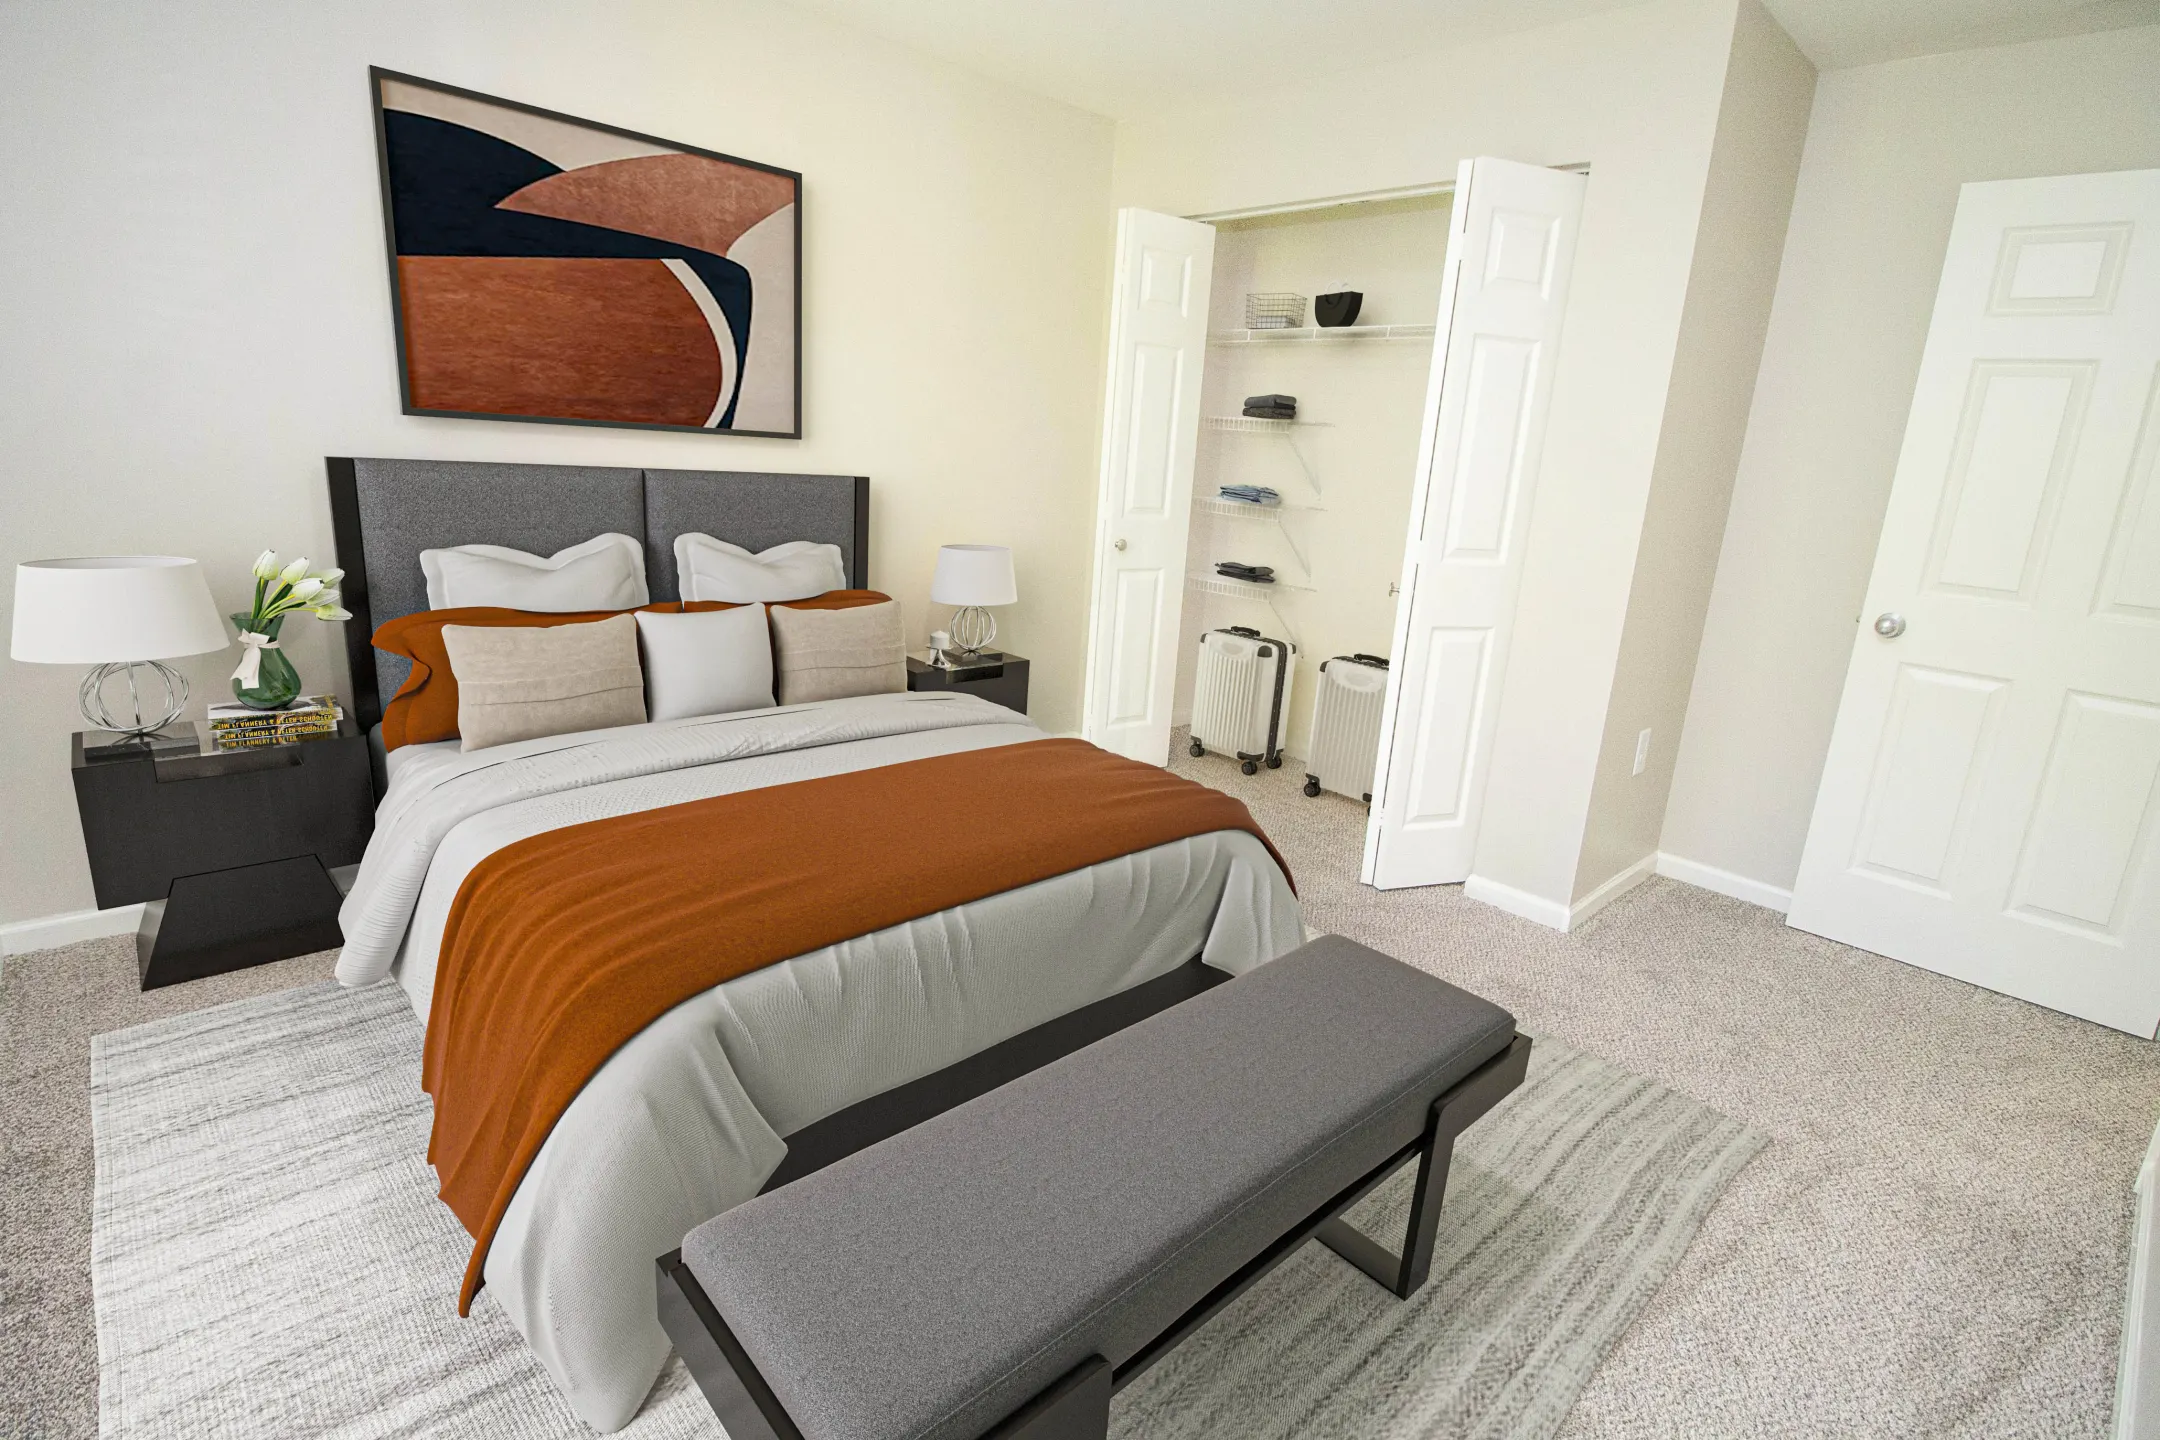 Bedroom - The Pointe at Canton Apartments & Townhomes - Canton, MI